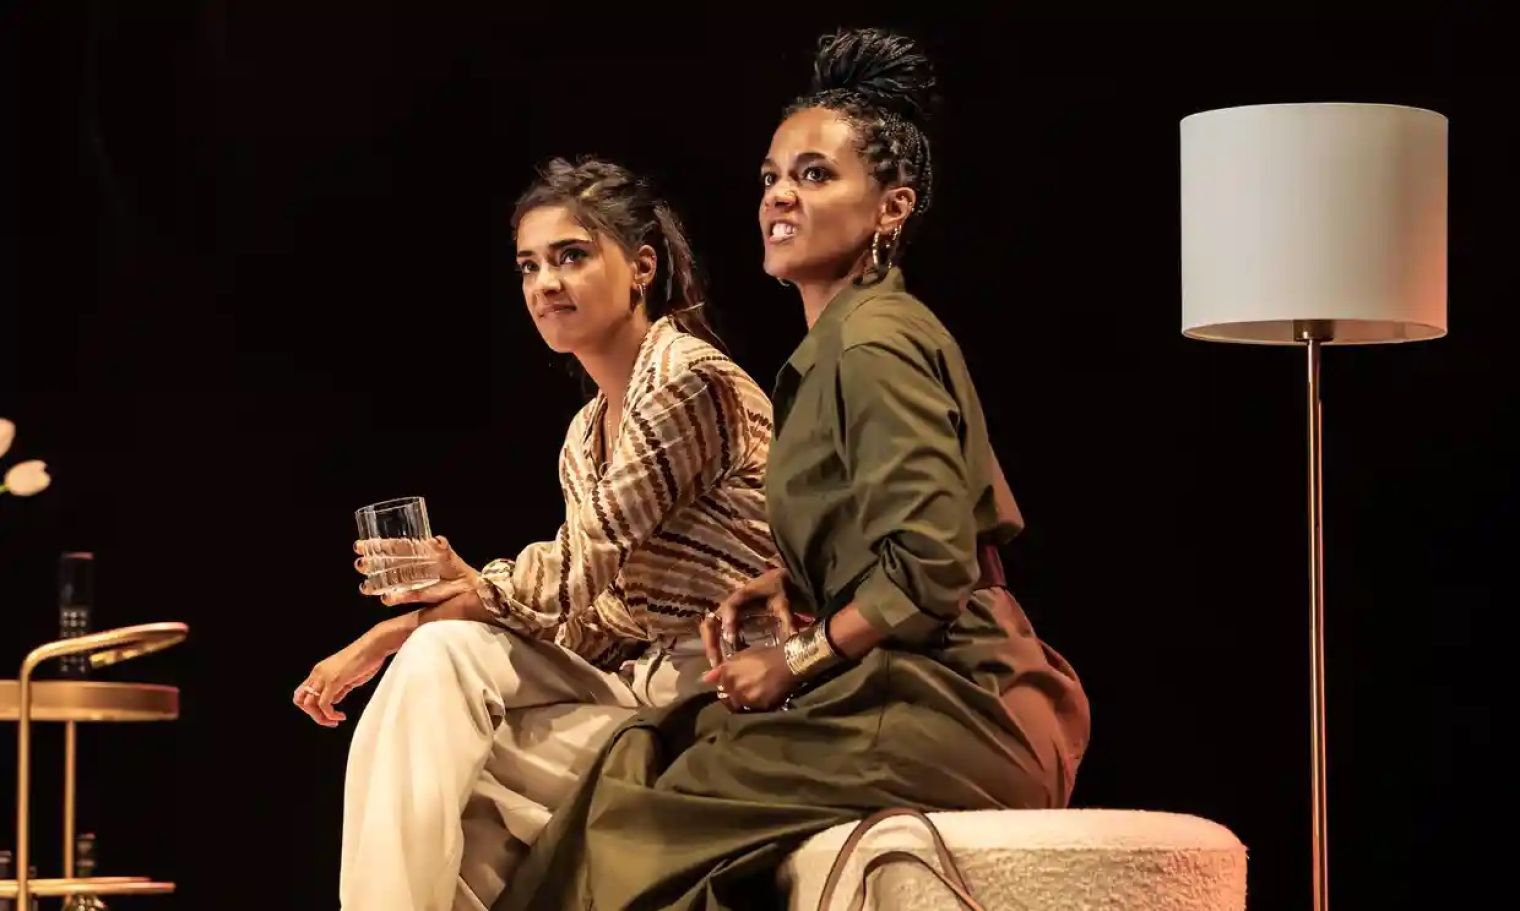 Dinita Gohil stars as Annette in a new production of the Tony and Olivier Award winning play ‘God of Carnage’, on at The Lyric Hammersmith now